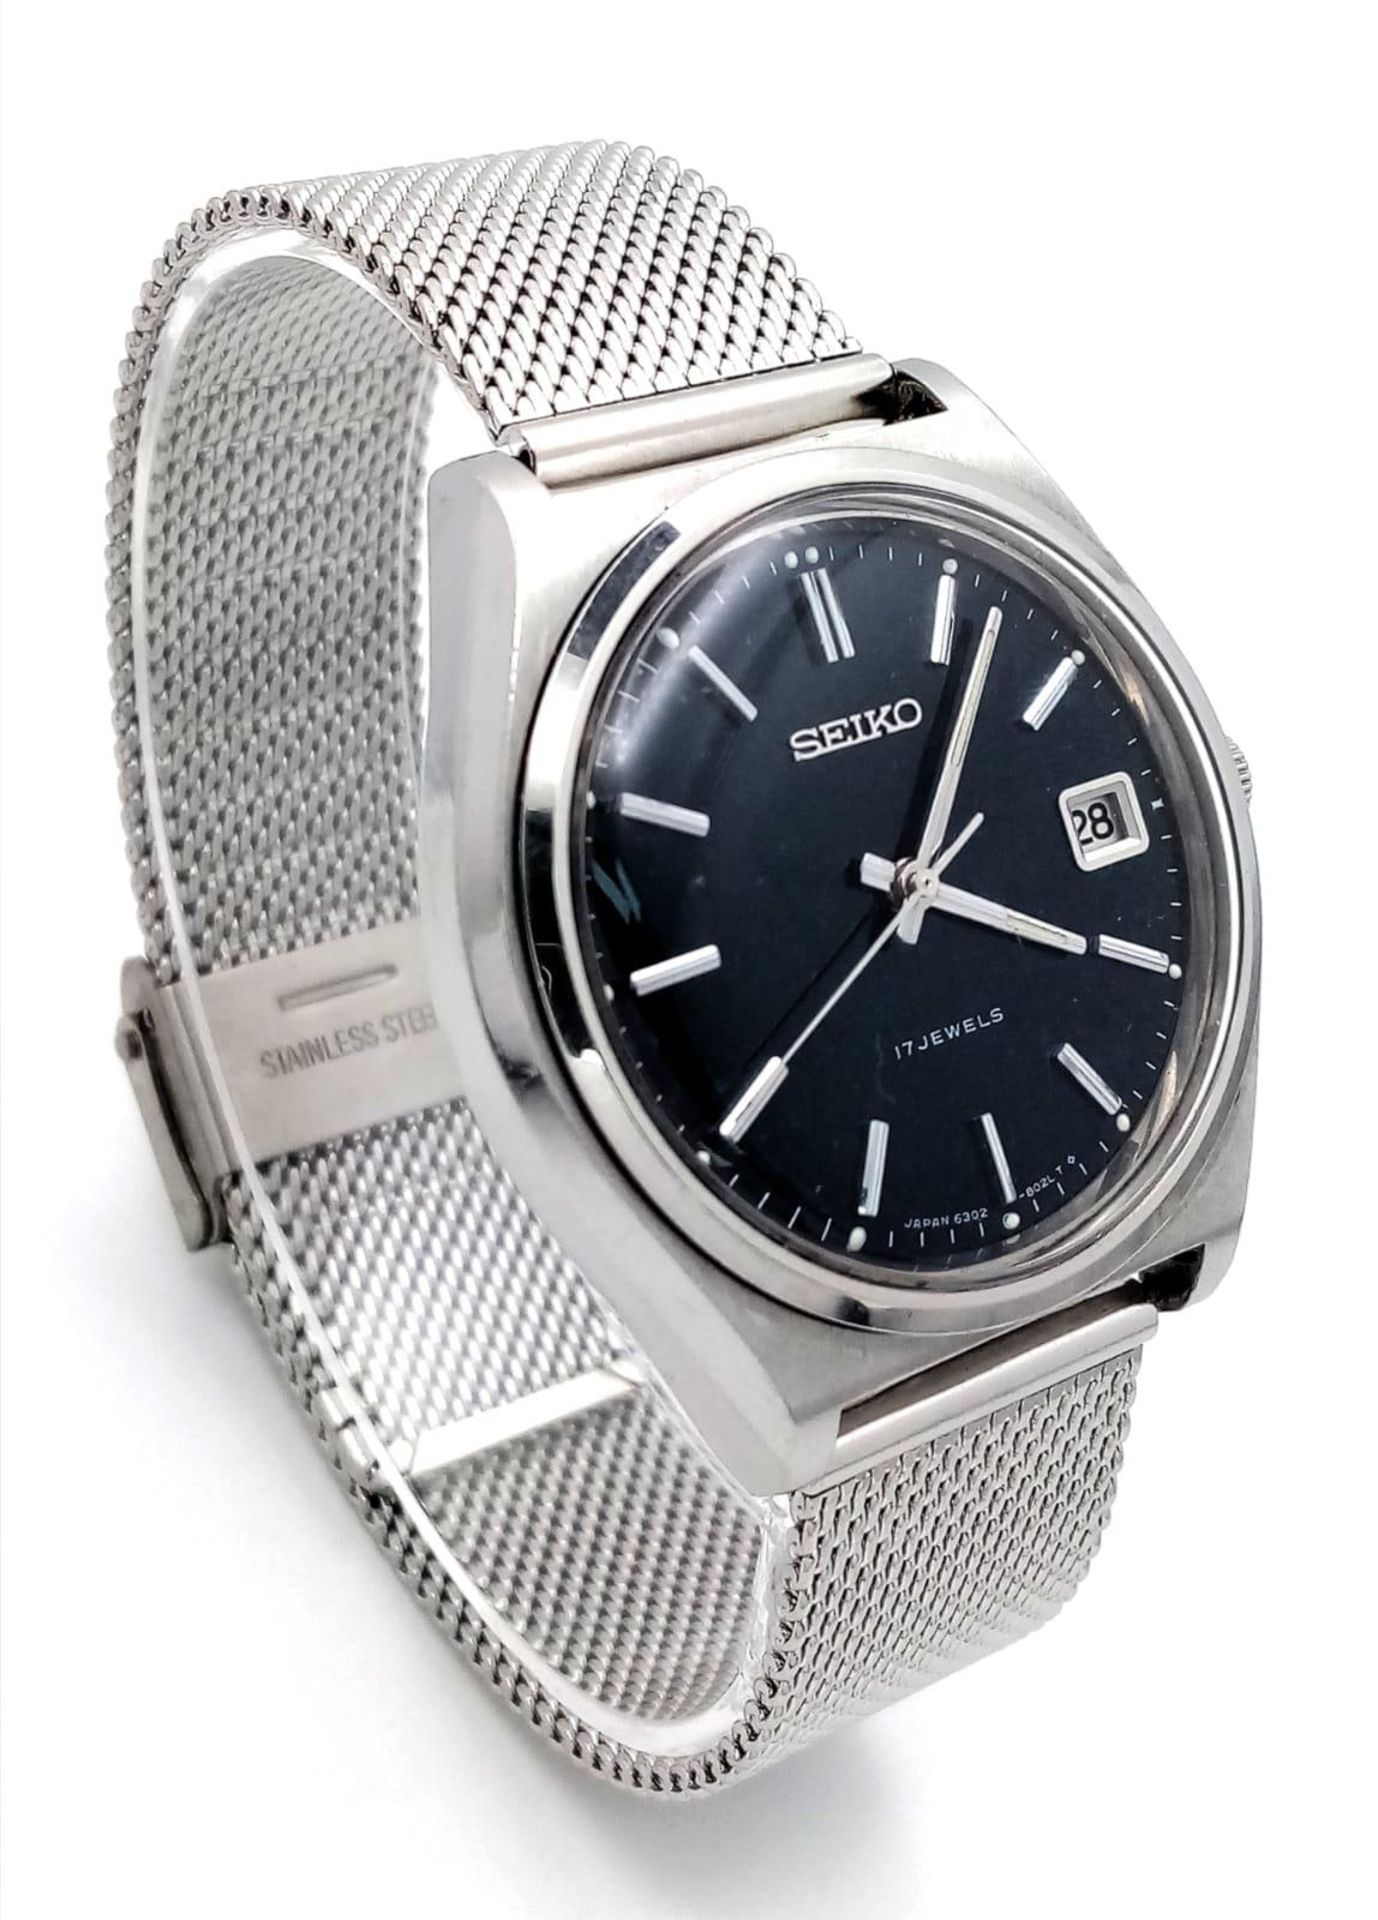 A Vintage Seiko Automatic Gents Watch. Stainless steel bracelet and case - 38mm. Blue dial with date - Bild 2 aus 7